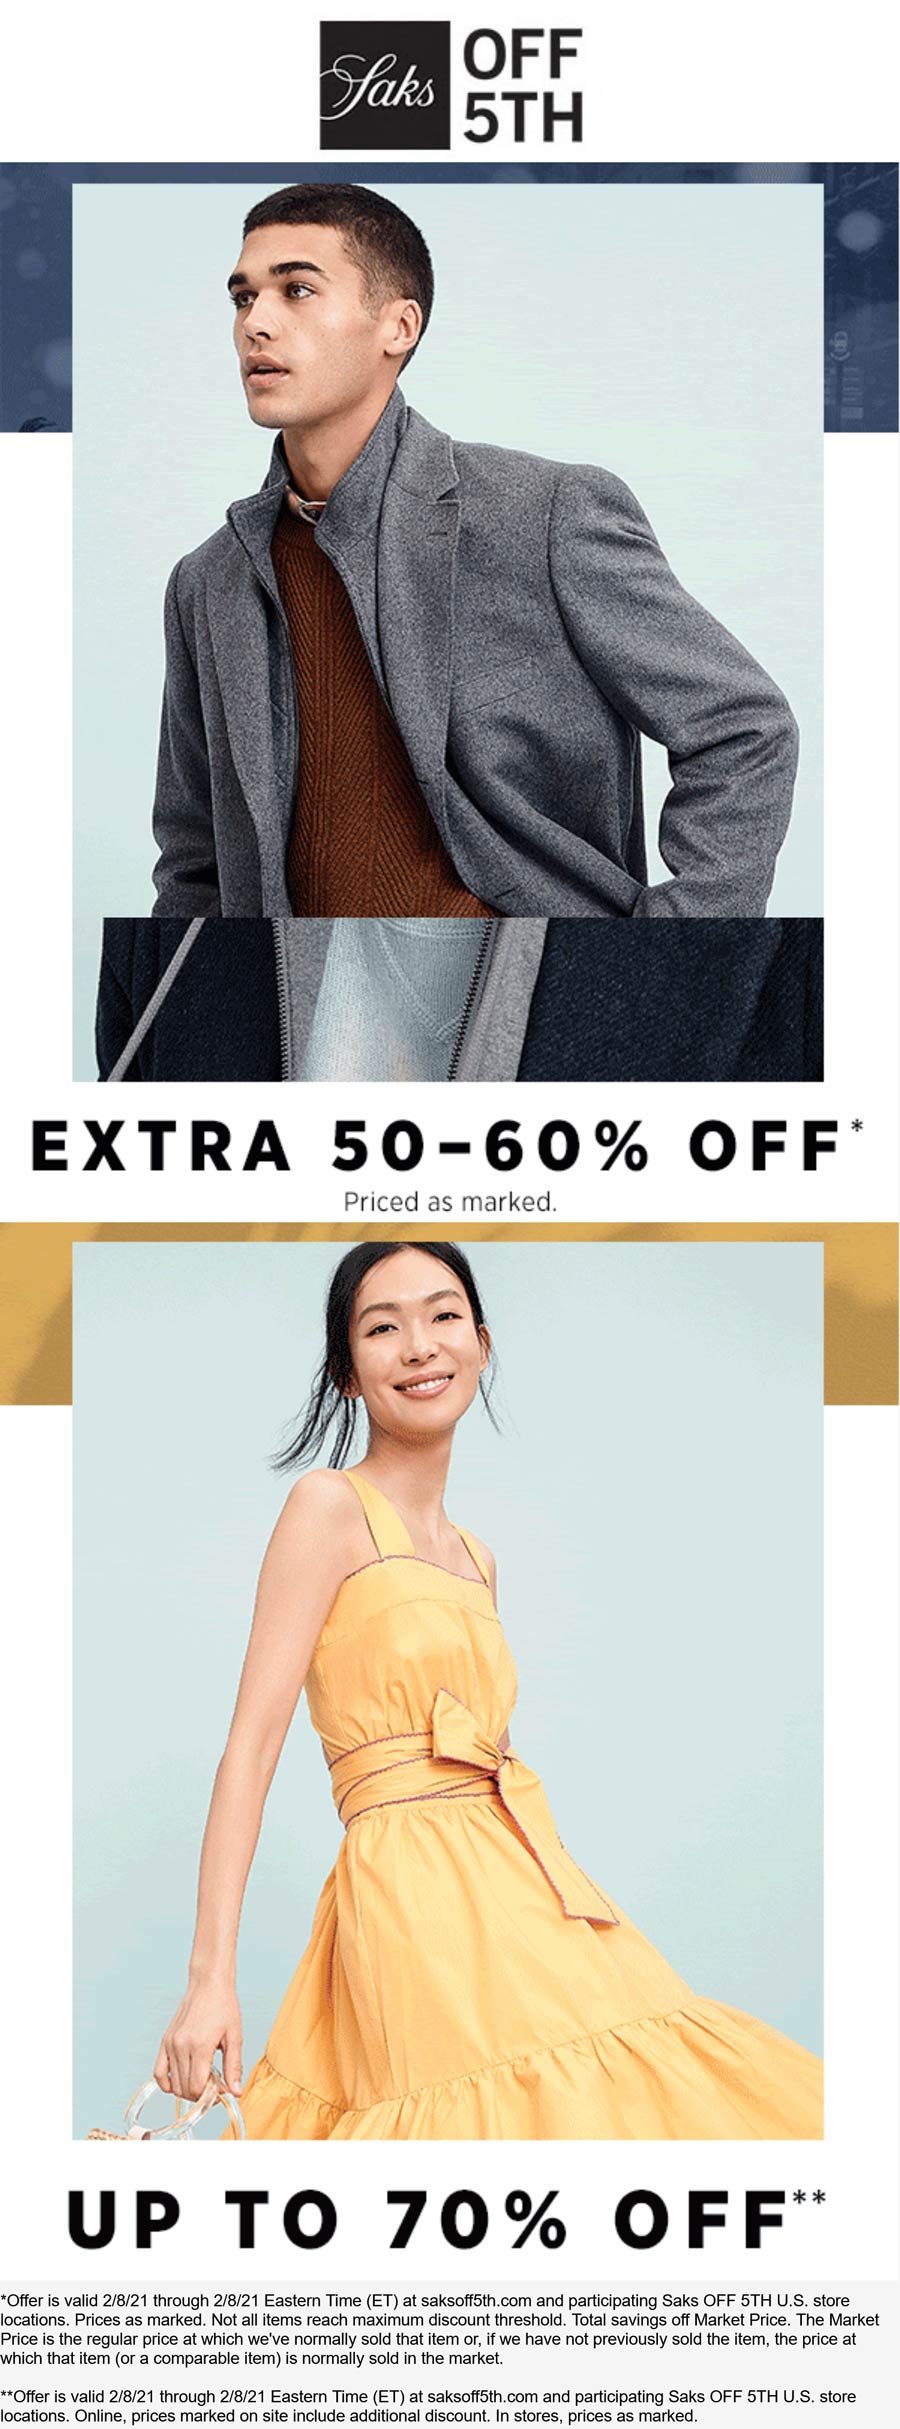 OFF 5TH stores Coupon  Extra 50-60% off classics today at Saks OFF 5TH #off5th 